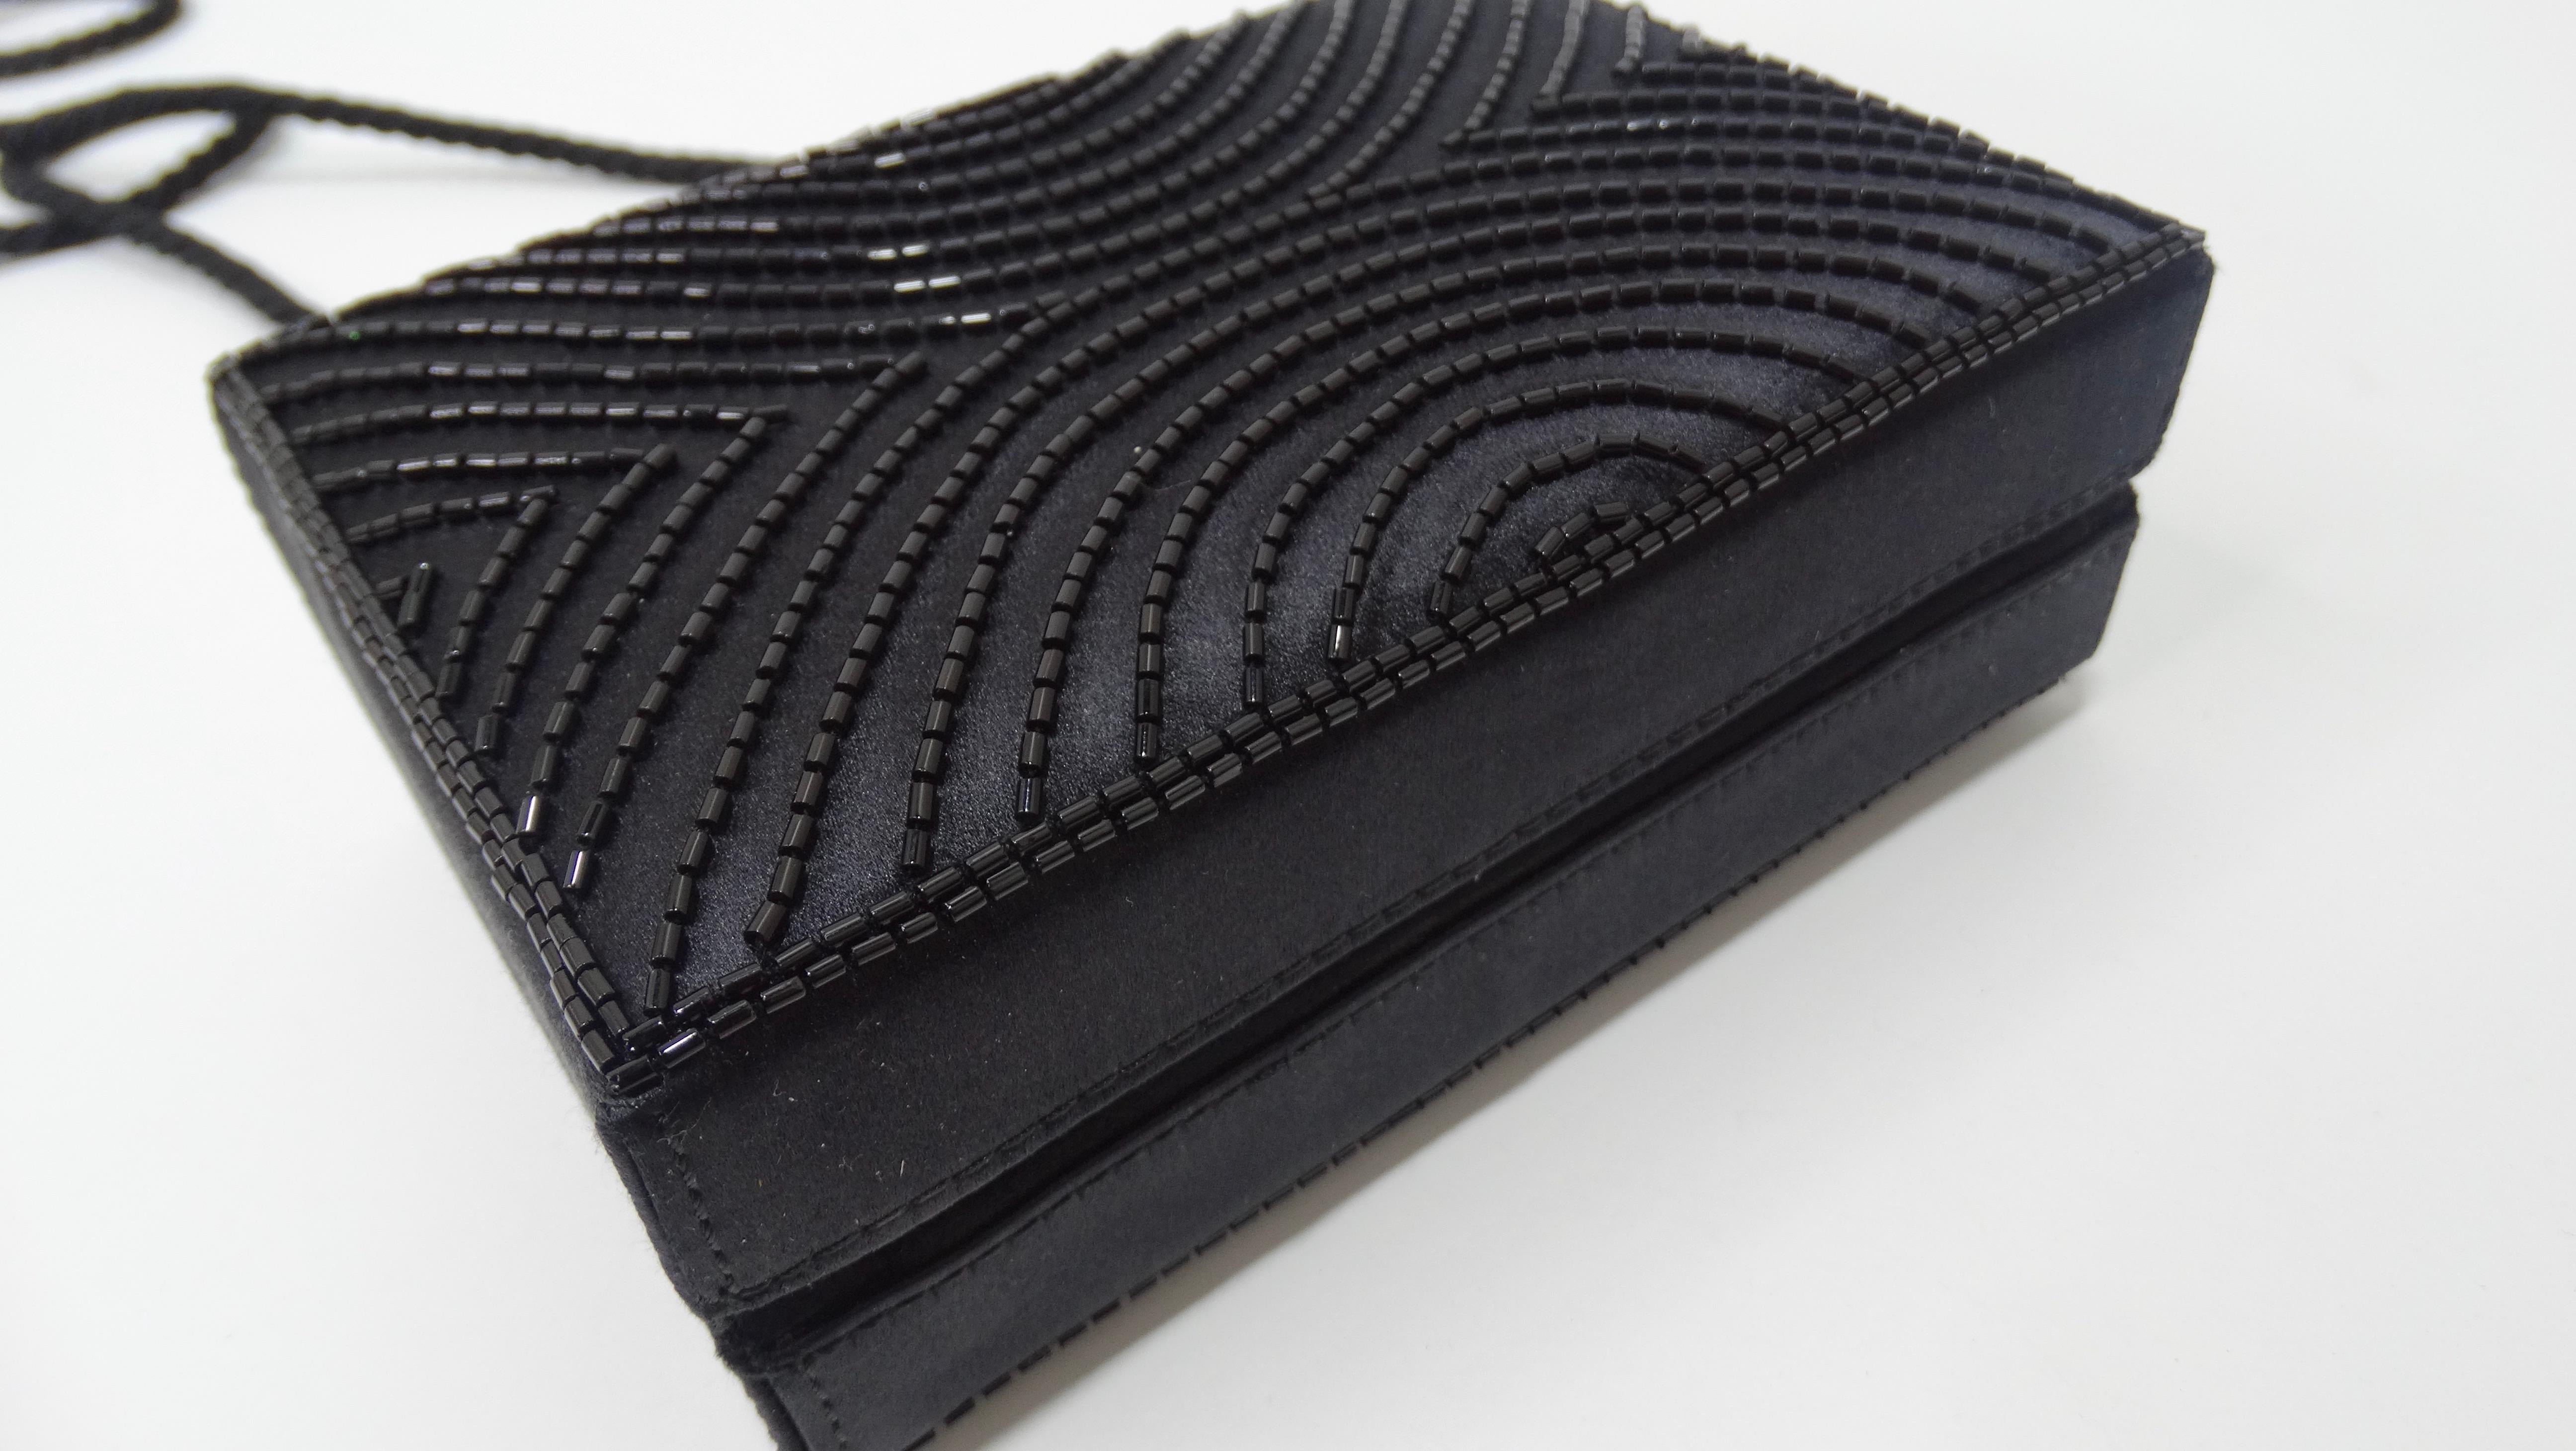 Chanel Black Beaded Evening Bag  In Good Condition For Sale In Scottsdale, AZ